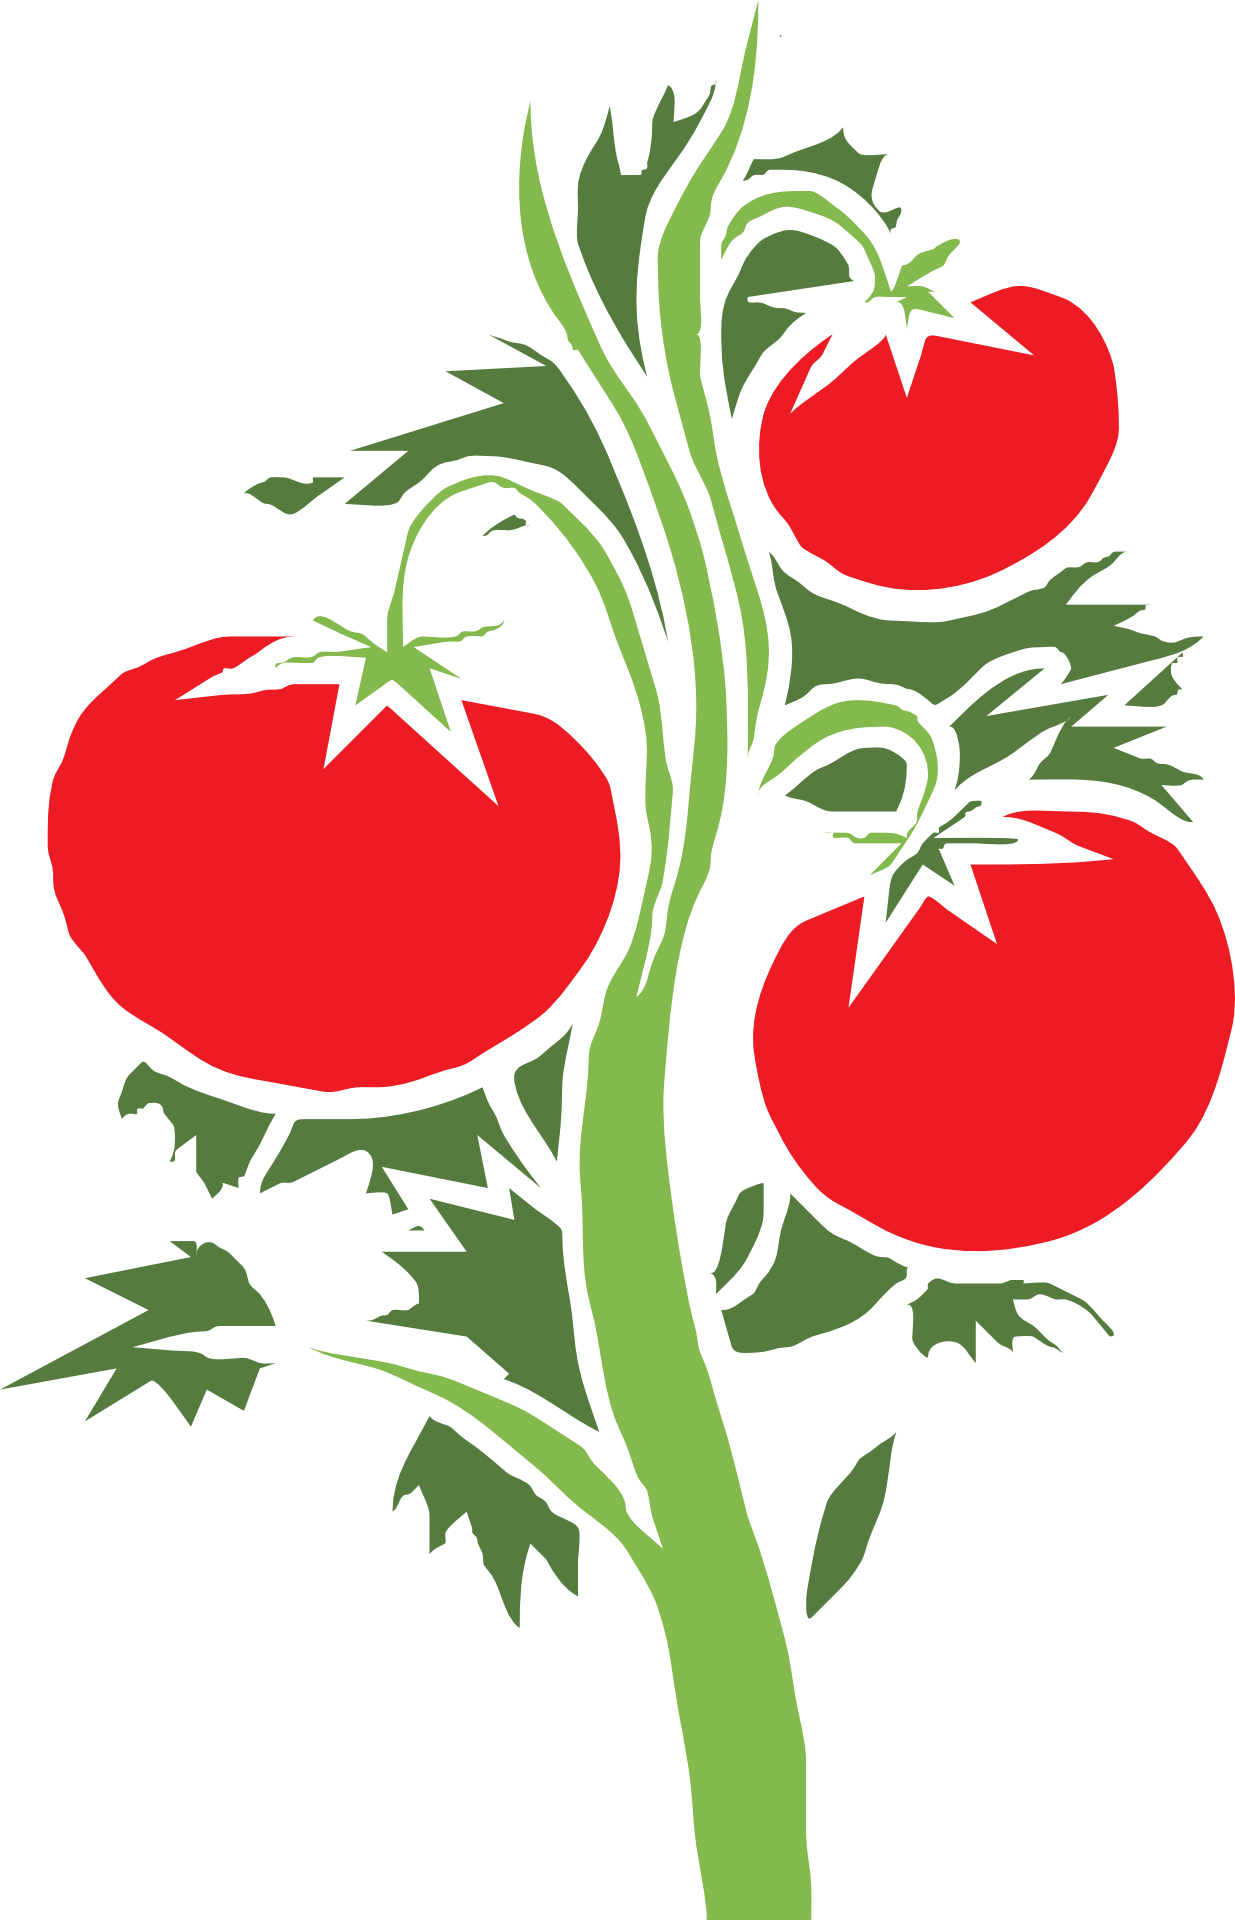 Tomatoes clipart different.